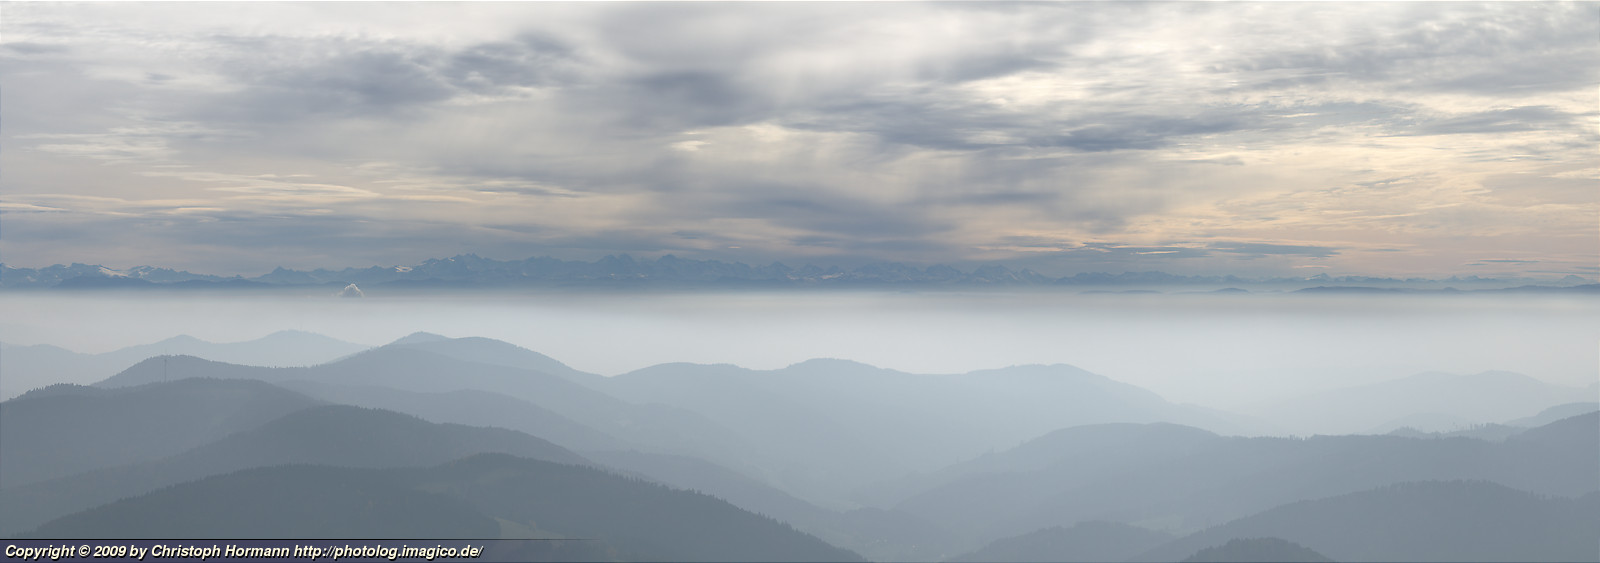 image 48: Alps panorama above the hills of the southern Black Forest